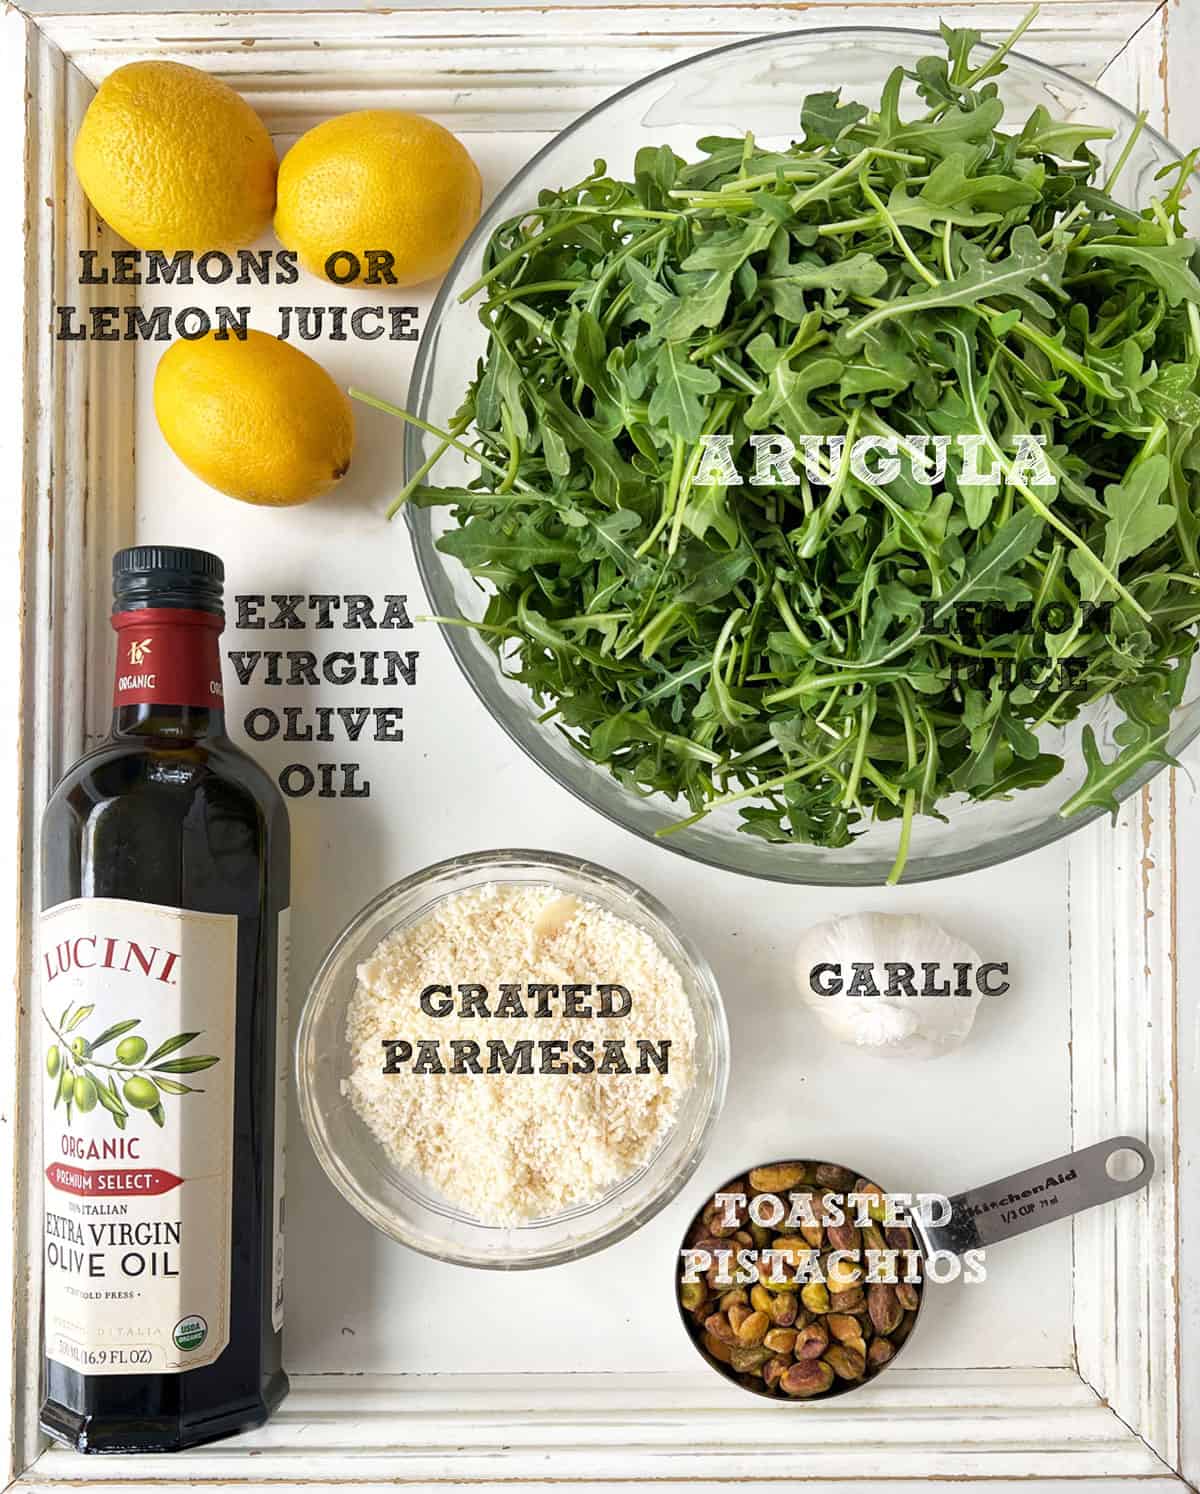 Ingredients for arugula pesto, seen from above: a bowl of arugula, three lemons, a bottle of olive oil, a small bowl of grated parmesan, some toasted pistachios and a bulb of garlic